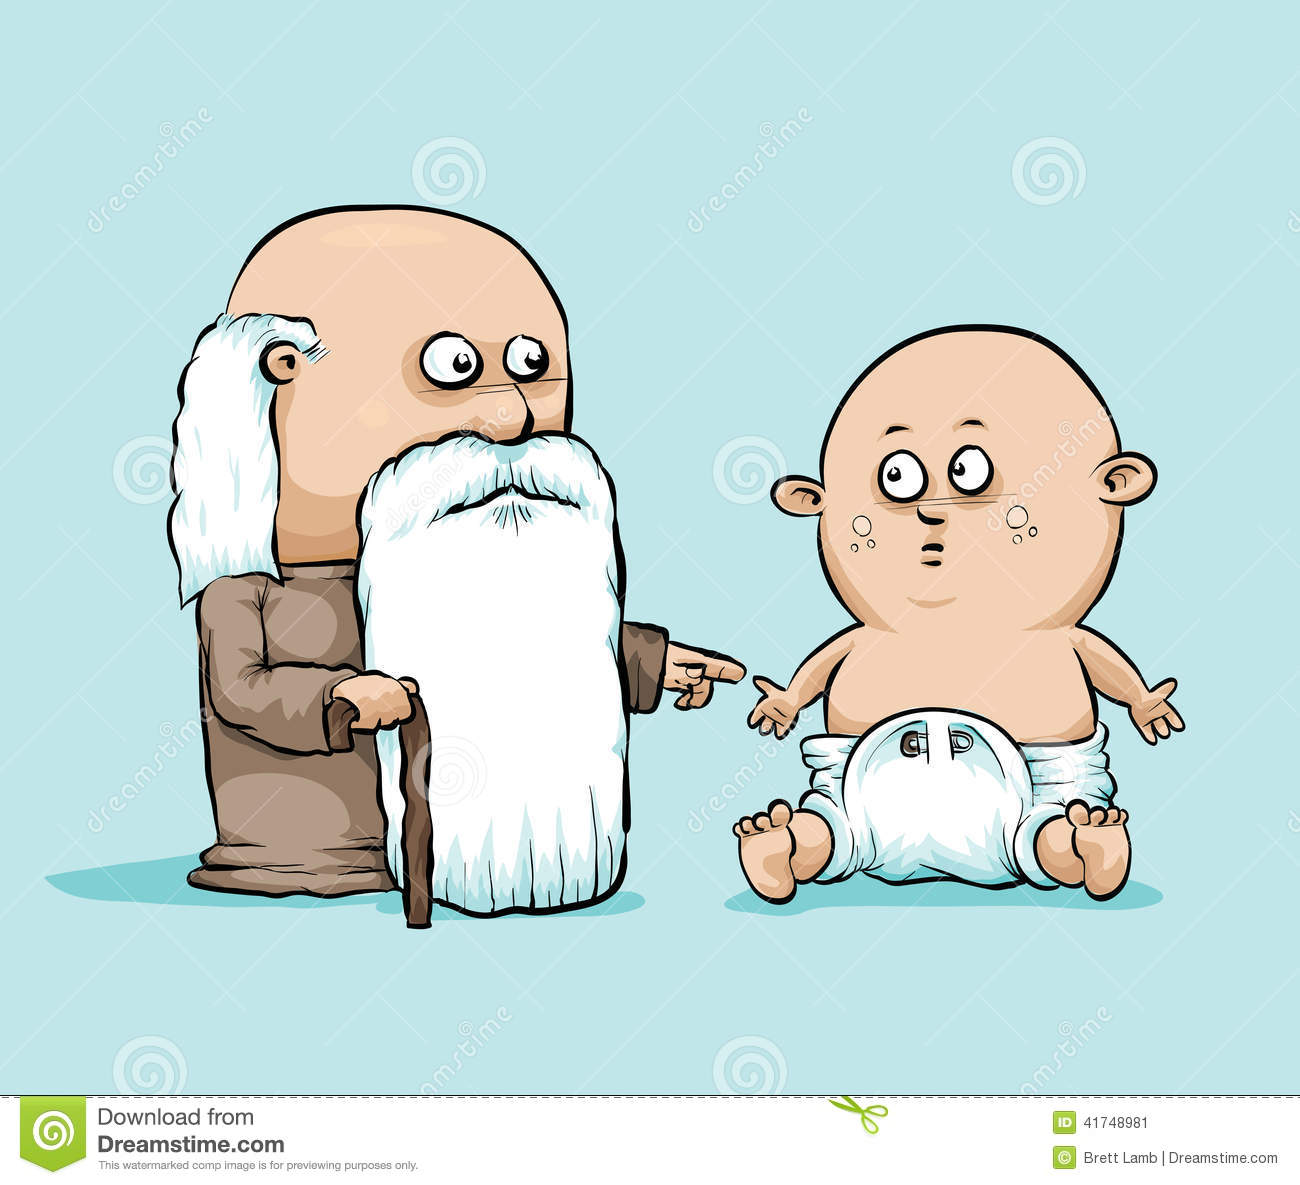 Showing post & media for Cartoon old man and baby.